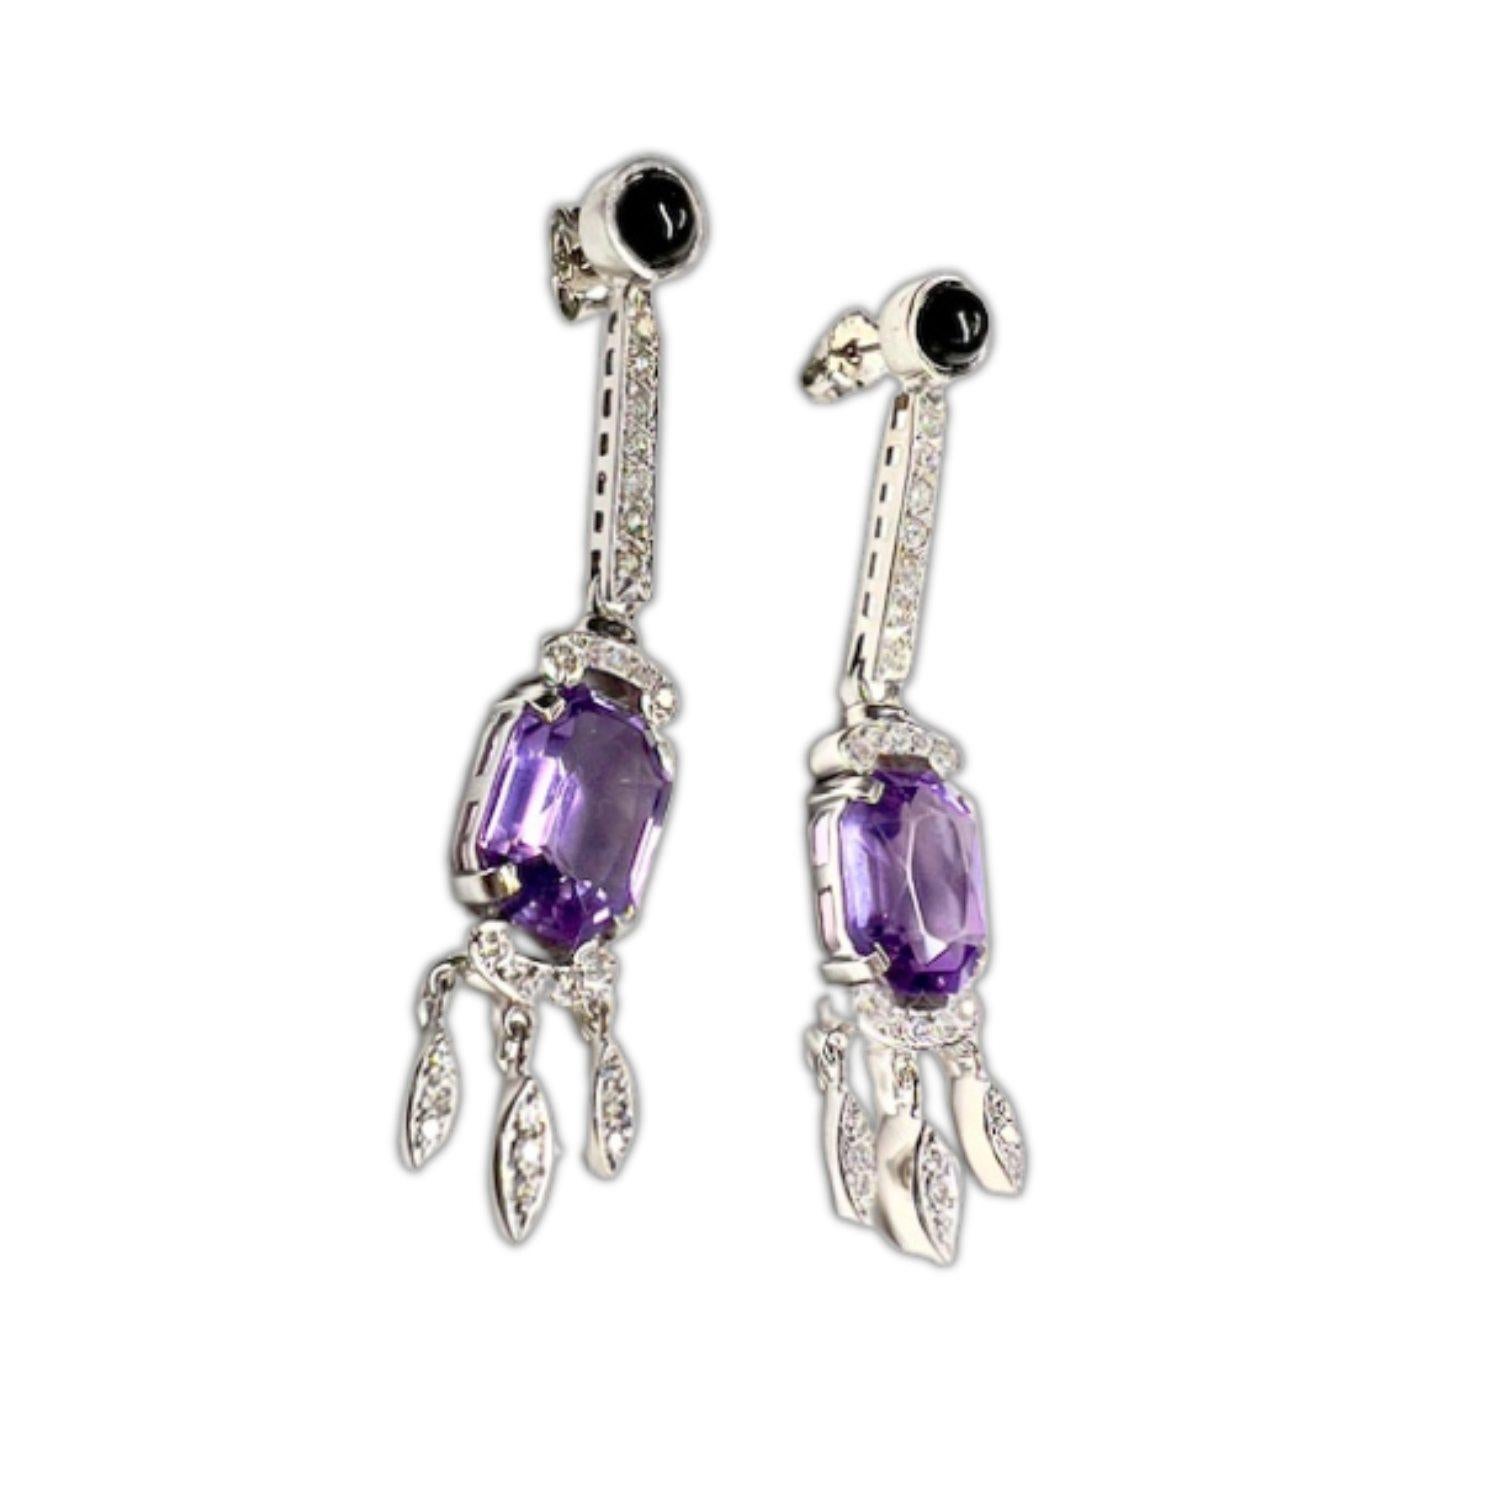 Indulge in the sophistication of the Art Deco era with these stunning white 18-karat gold earrings adorned with diamonds, onyx, and amethysts. A true fusion of luxury and vintage charm, these earrings exude an aura of timeless elegance.

The focal